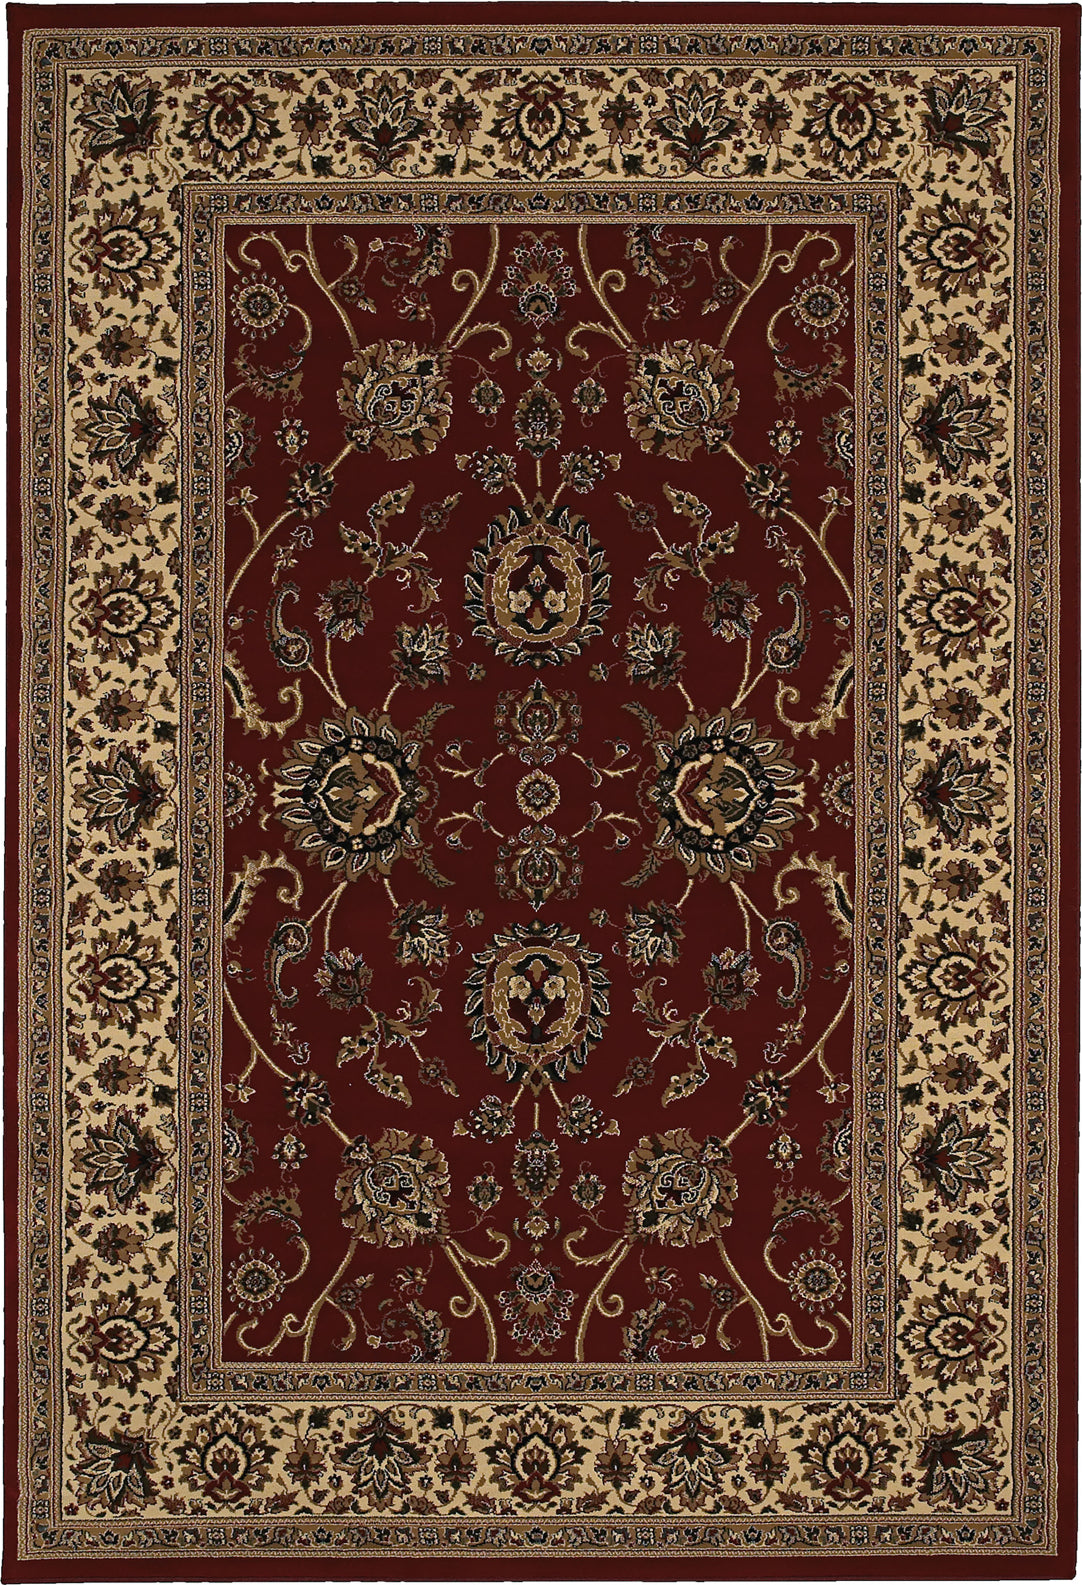 Oriental Weavers Ariana 130/8 Red/Ivory Area Rug main image featured